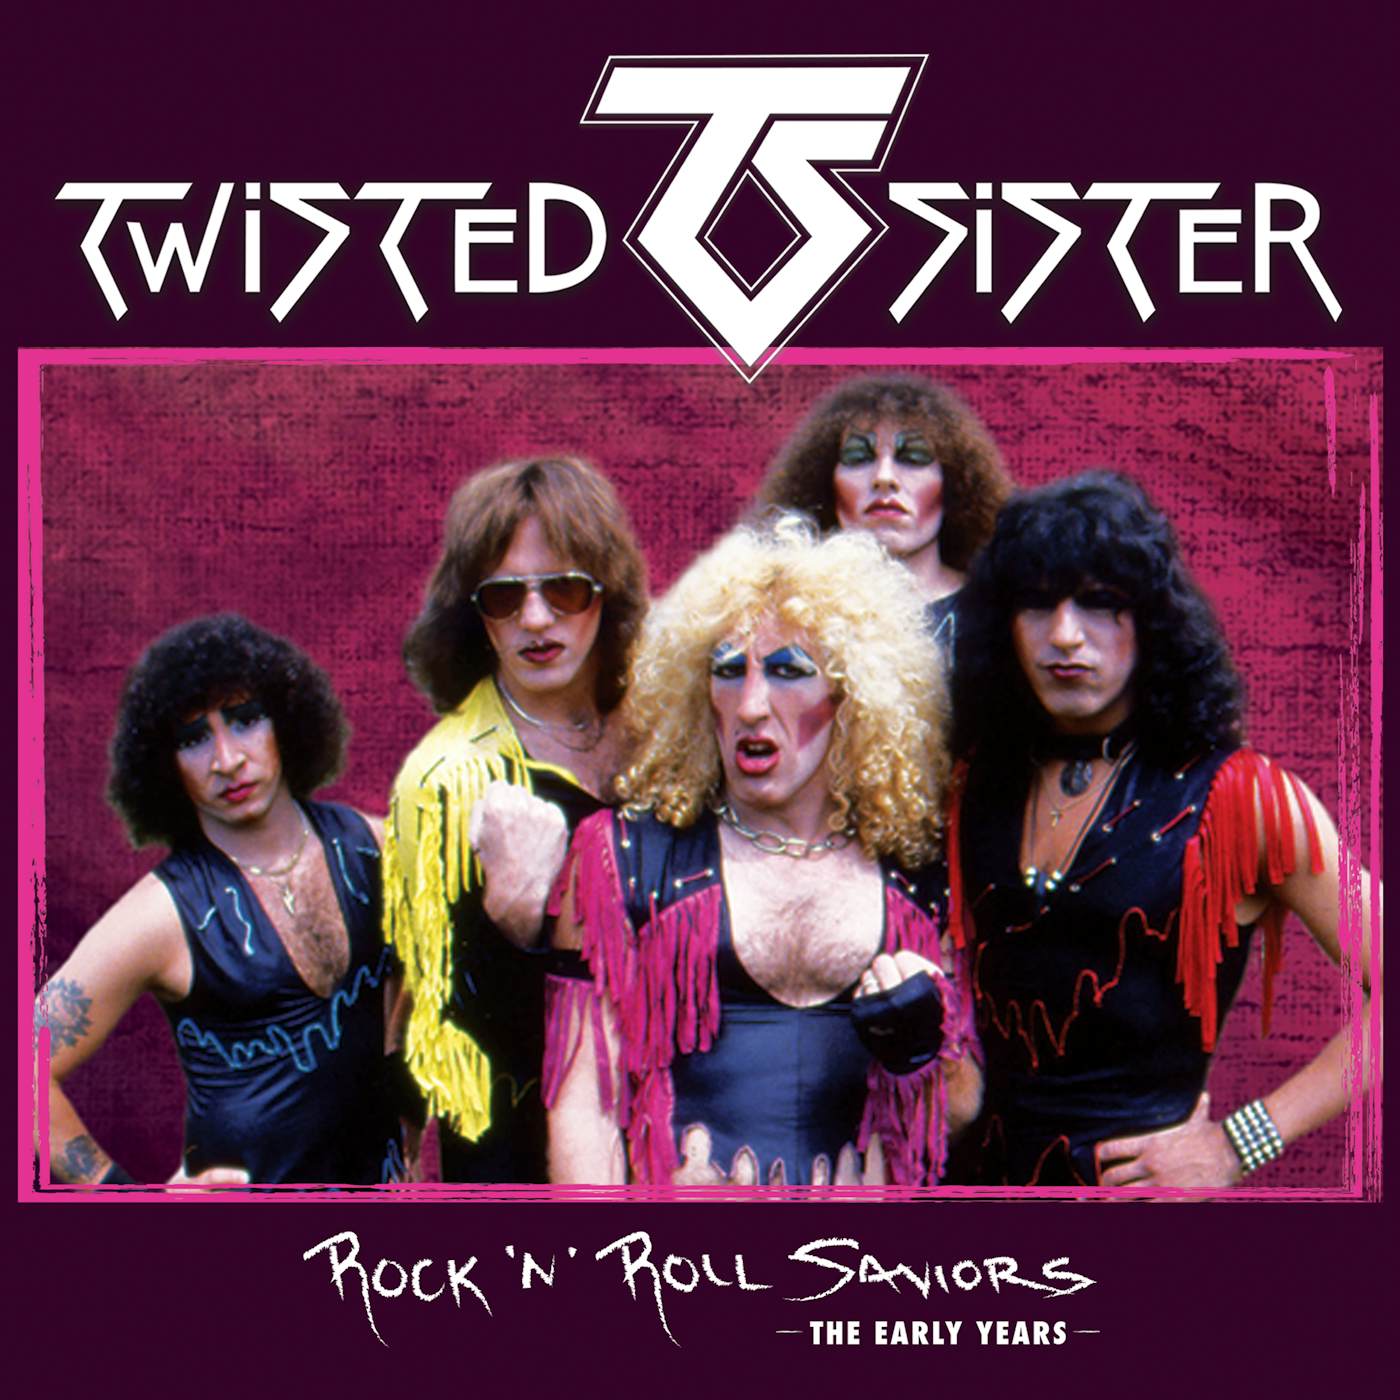 Twisted Sister ROCK 'N' ROLL SAVIORS - THE EARLY YEARS CD